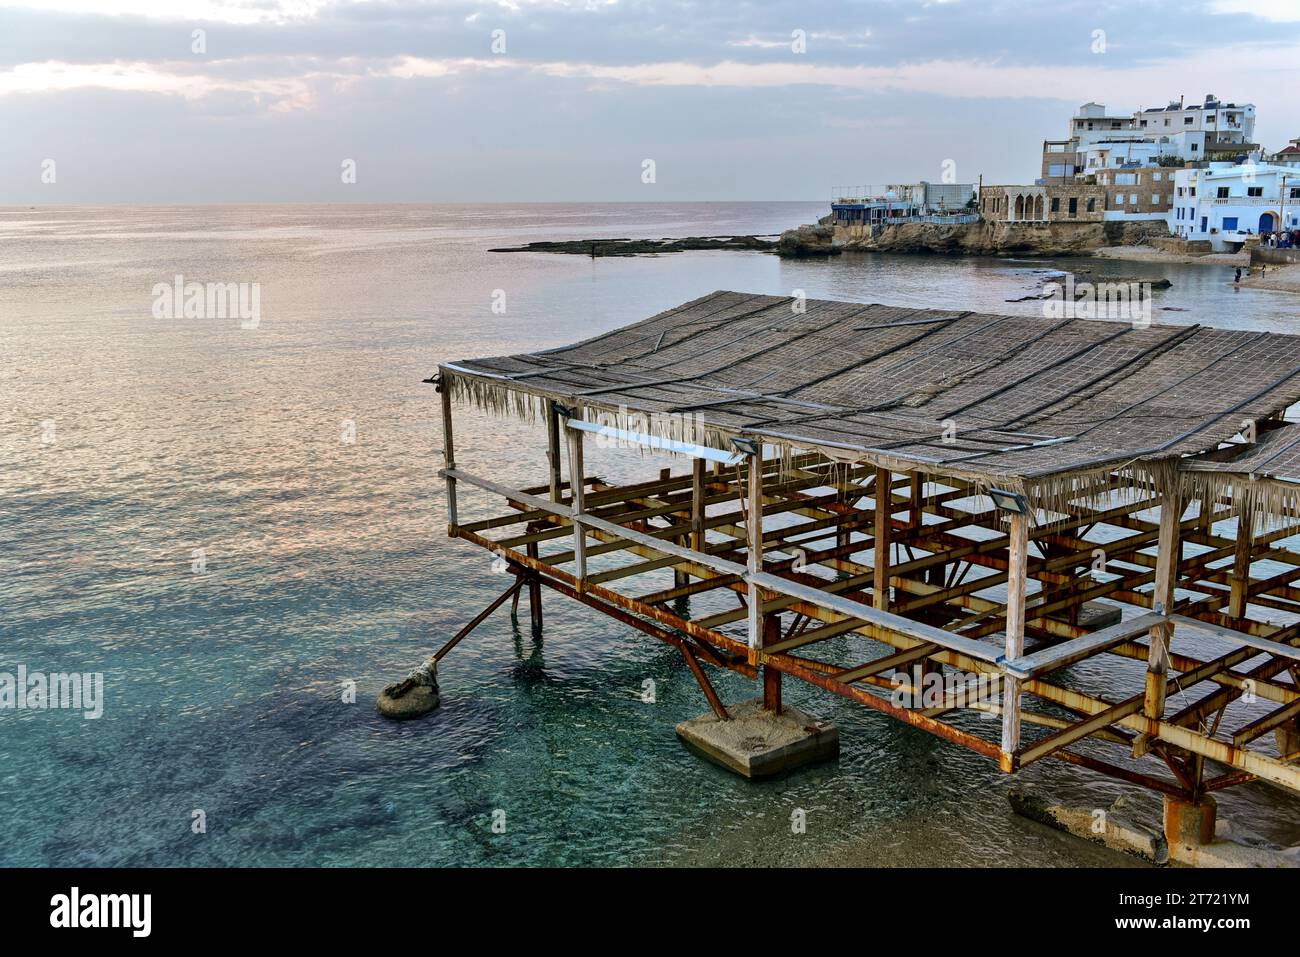 View of Batroun Bay over early dinner on the roof terrace of Le Marin Restaurant in Batroun, Lebanon Stock Photo